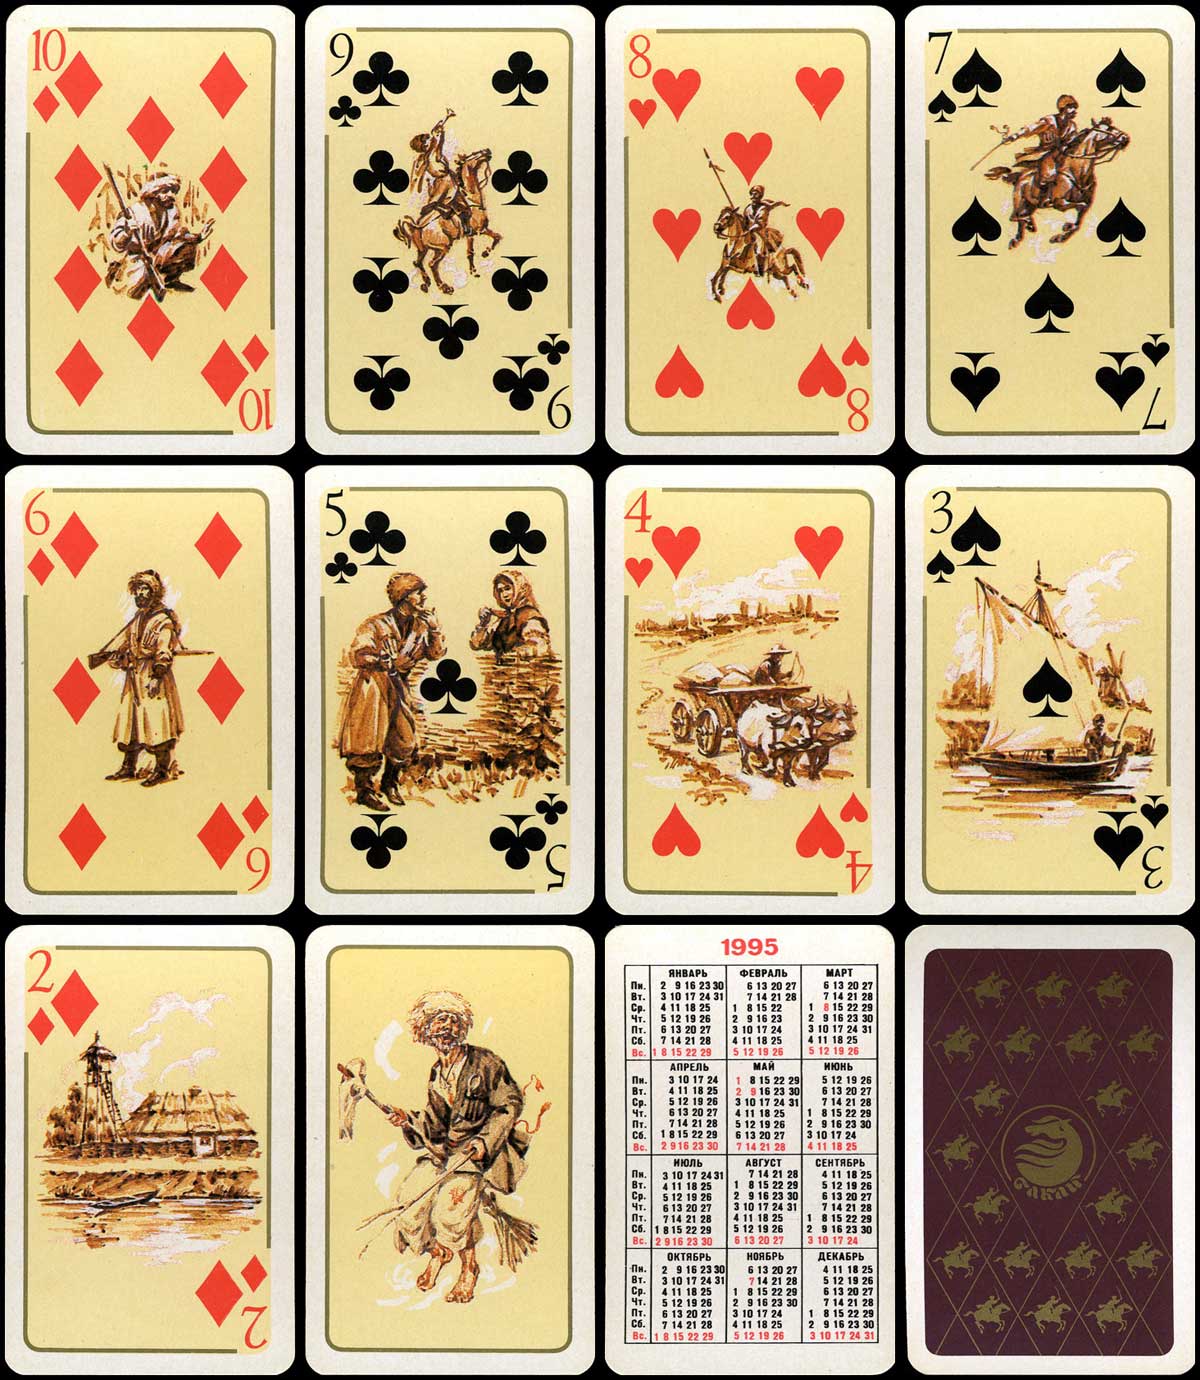 “Cossack” playing cards, with artwork by O. Panchenko dedicated to the revival of the traditions of the Cossacks. Printed by the Colour Printing Plant, St Petersburg, 1994